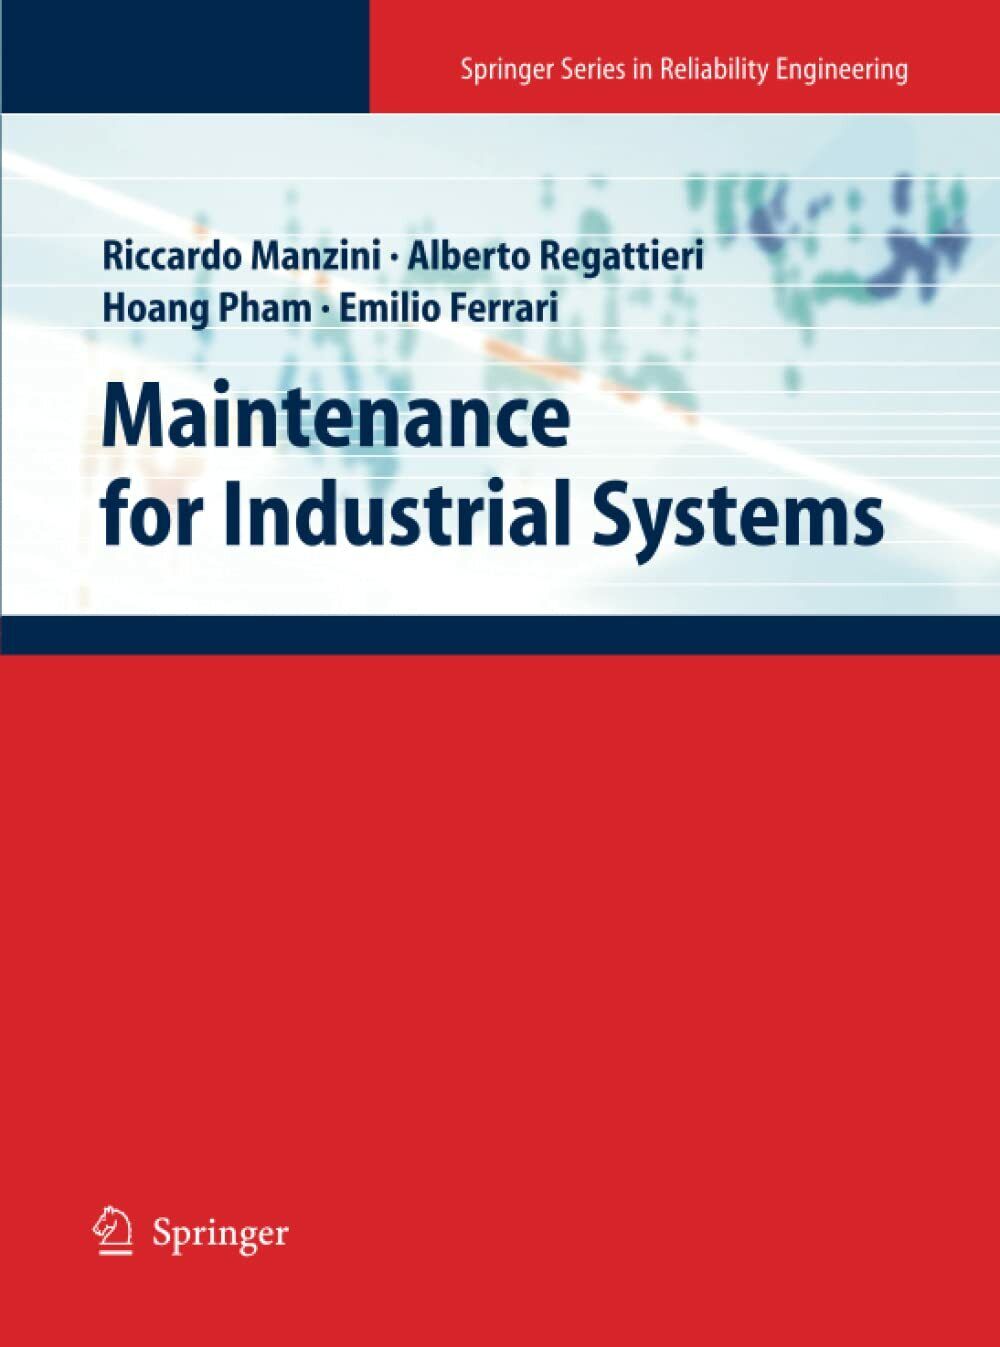 Maintenance for Industrial Systems - Springer, 2012